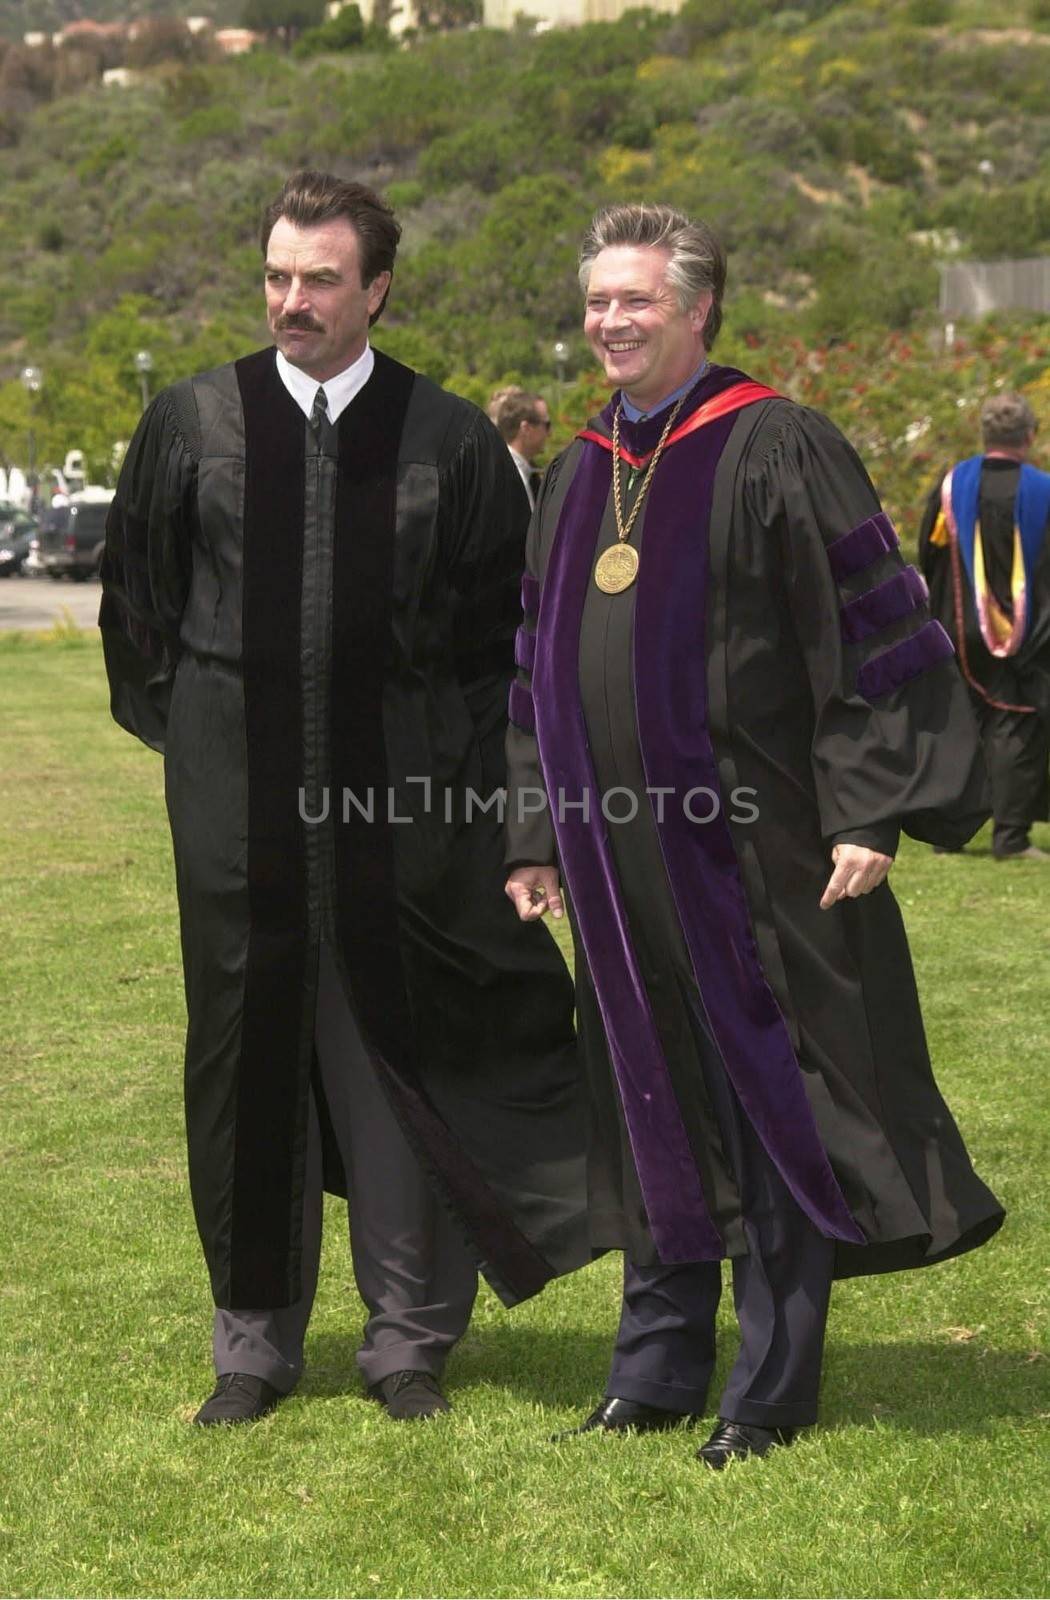 Tom Selleck Degree by ImageCollect